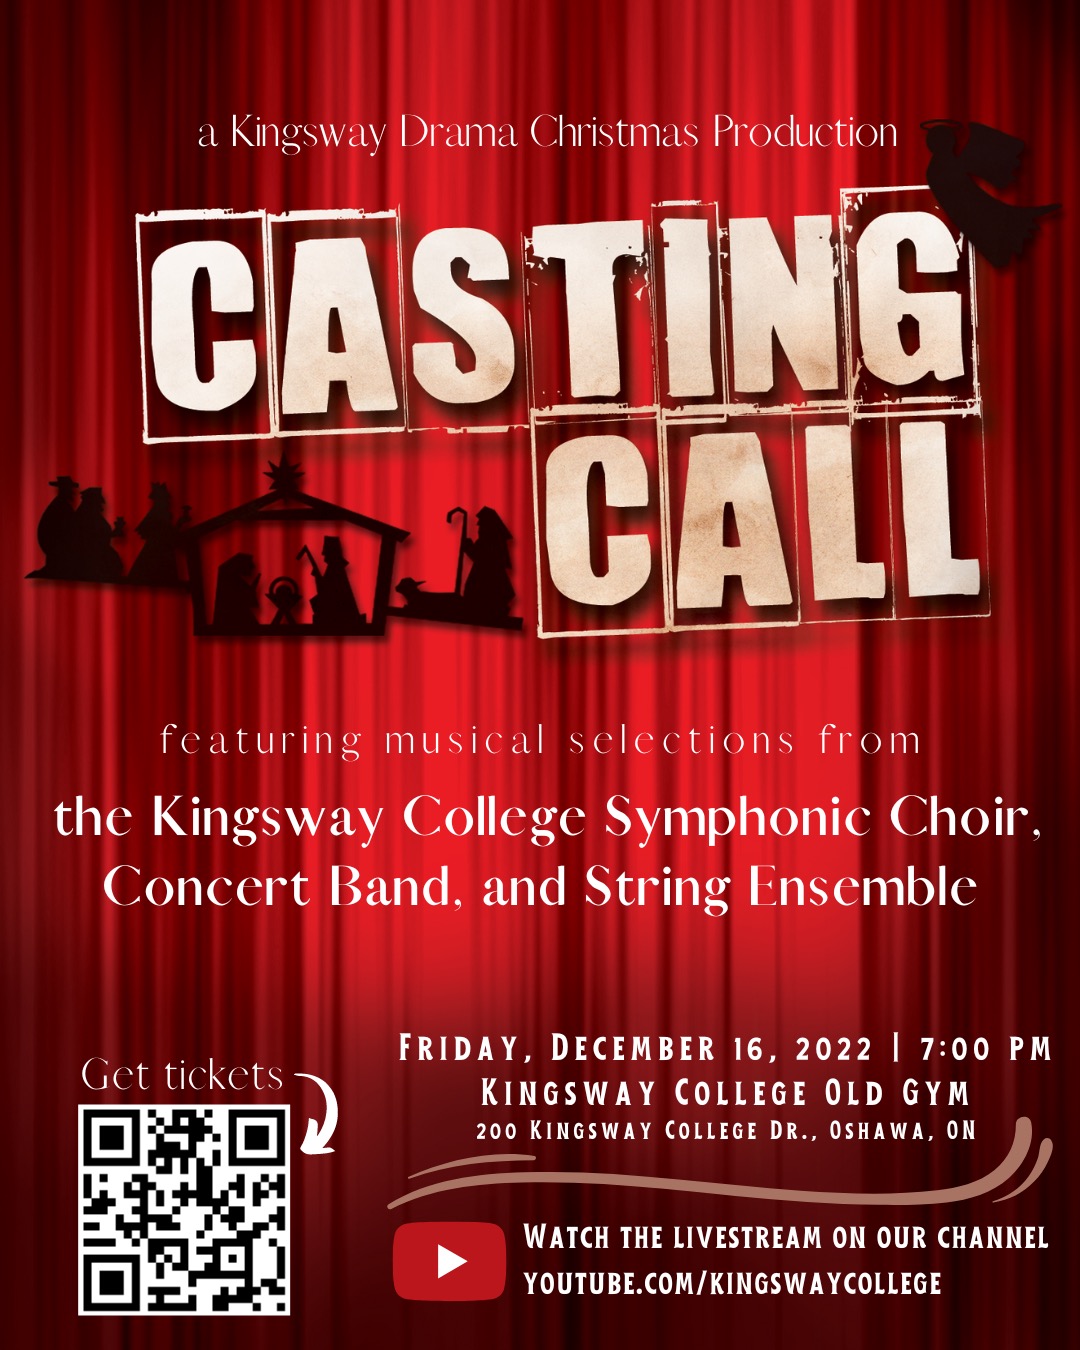 A Kingway Drama Christmas Production featuring musical selections from the Kingsway College Symphonic Choir, Concert Band, and String Ensemble